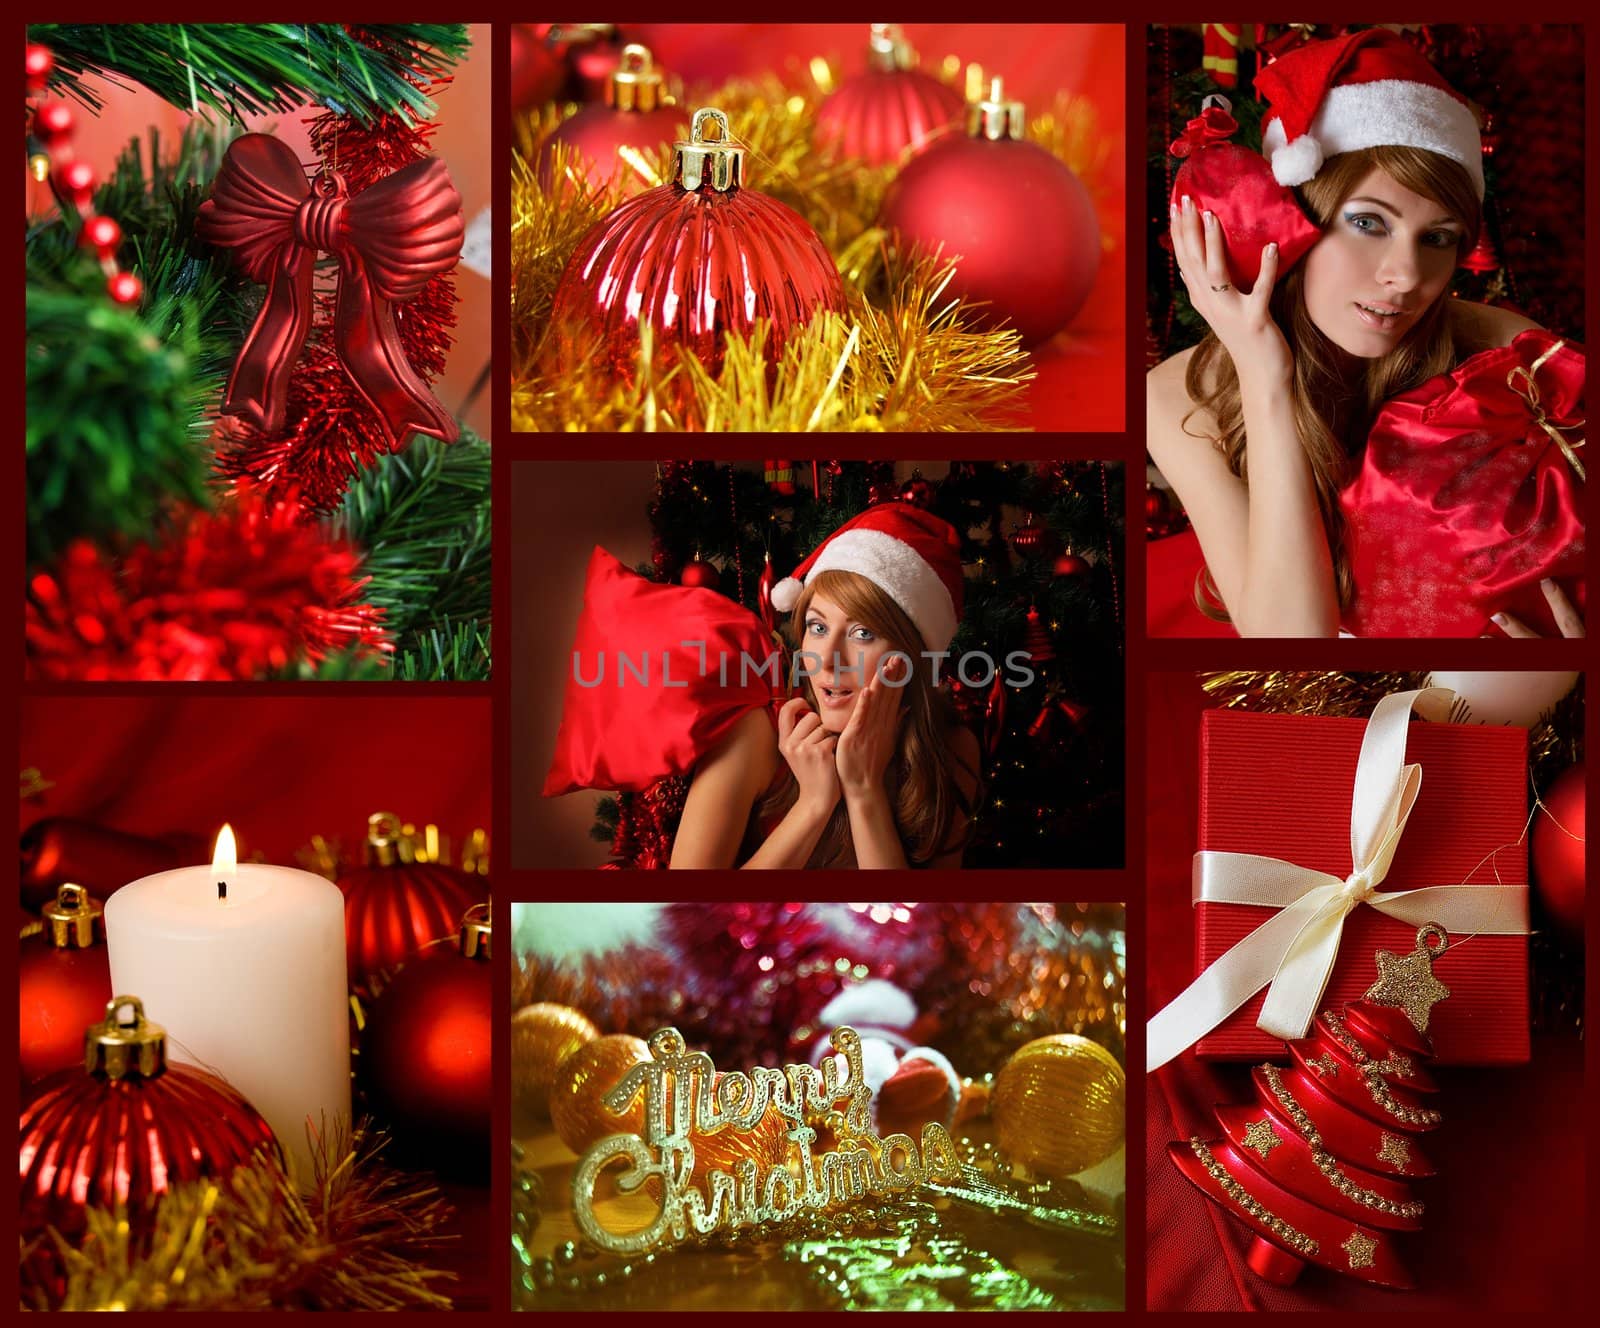 Red collage of Christmas related theme, decorations, winter holiday gifts and woman Santa Helper